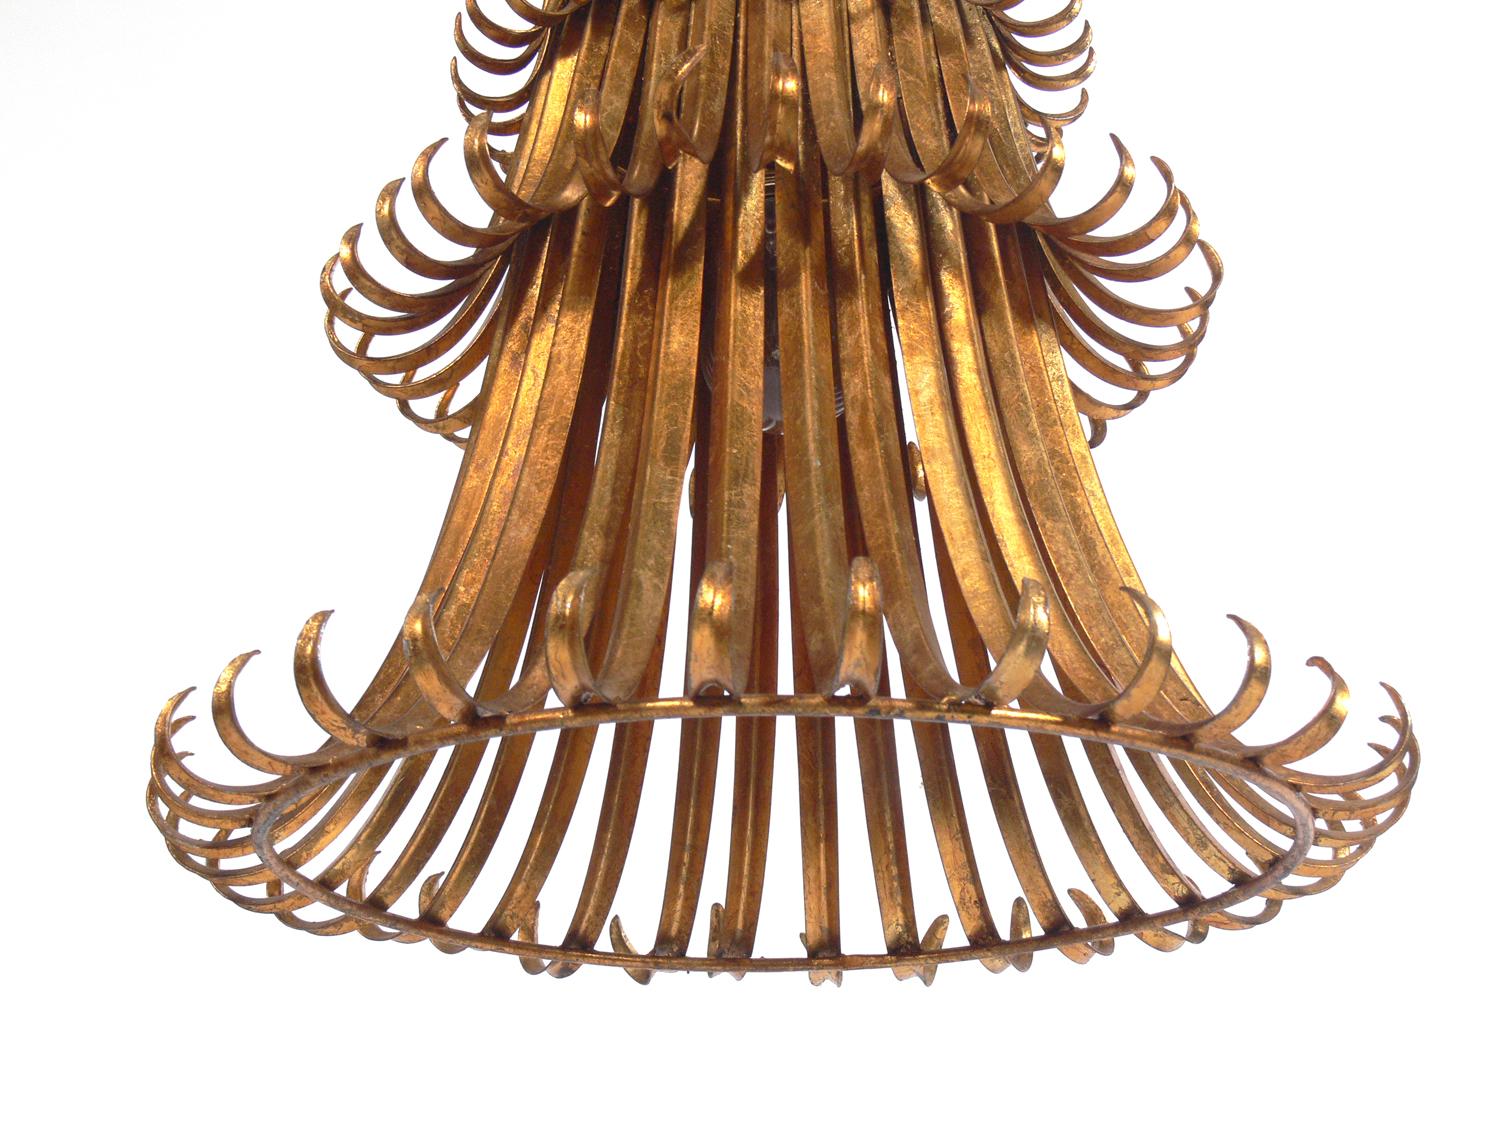 Glamorous gilt metal chandelier or pendant, Italian, circa 1950s. Rewired. Takes one bulb 75 watt max recommended. The gilt metal pendant itself measures 21.5